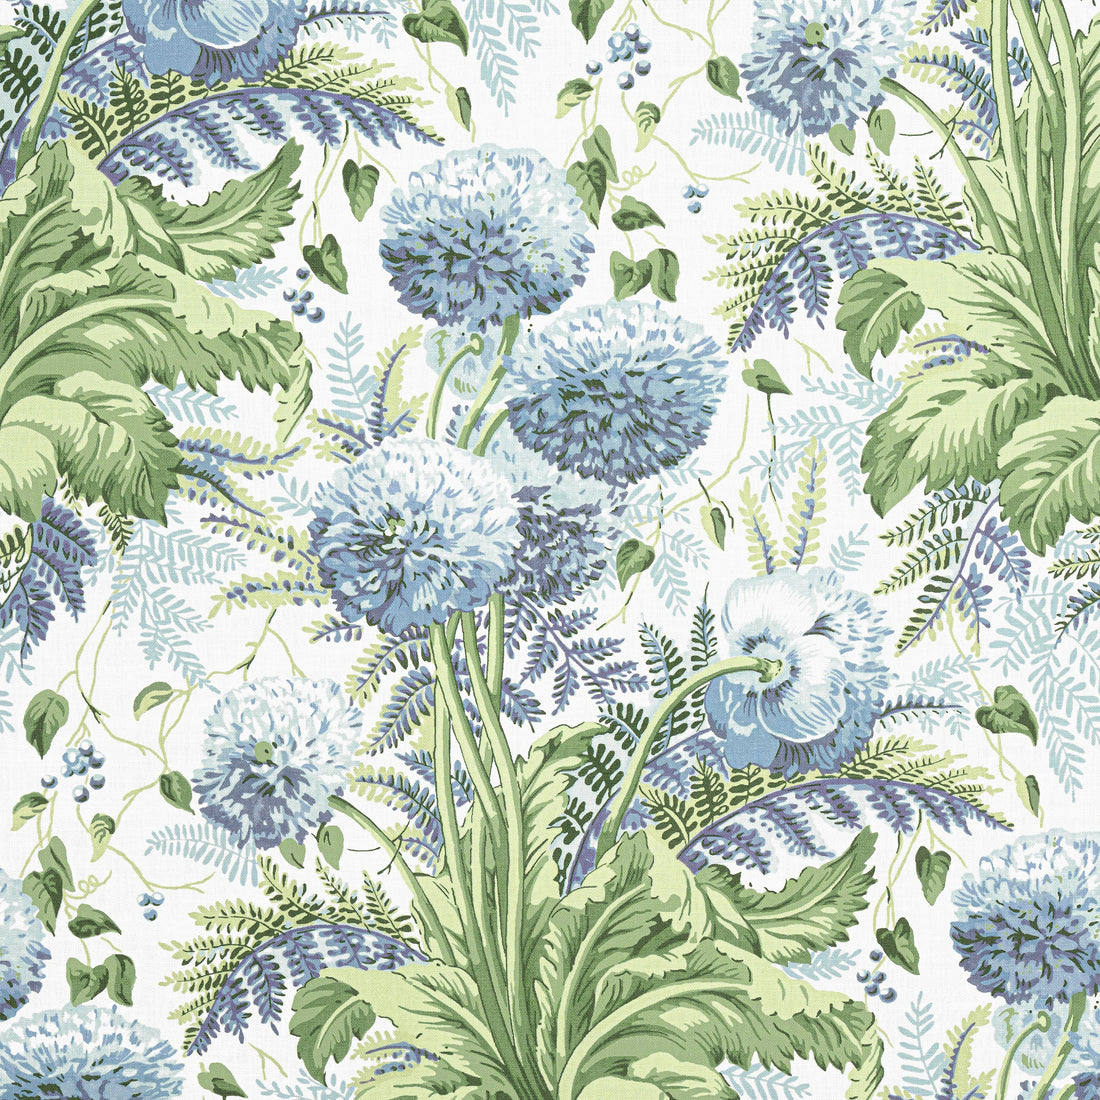 Dahlia fabric in Sky on White color - pattern number AF24535 - by Anna French in the Devon collection